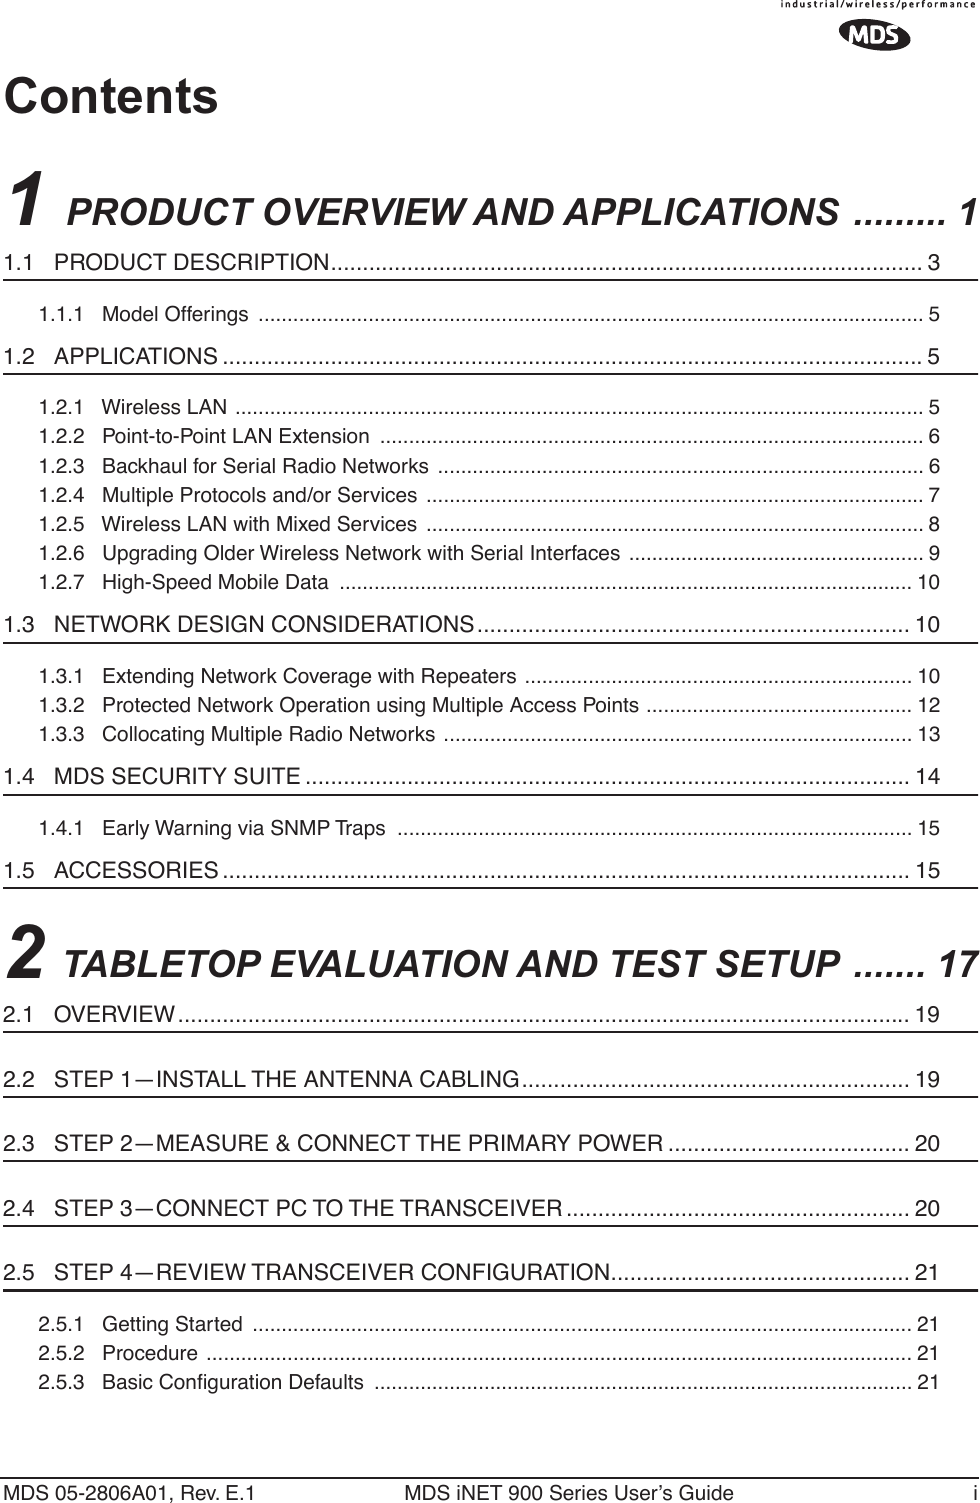  MDS 05-2806A01, Rev. E.1 MDS iNET 900 Series User’s Guide i Contents 1  PRODUCT OVERVIEW AND APPLICATIONS  ......... 1 1.1   PRODUCT DESCRIPTION............................................................................................. 3 1.1.1   Model Offerings  ................................................................................................................... 5 1.2   APPLICATIONS ..............................................................................................................5 1.2.1   Wireless LAN ....................................................................................................................... 51.2.2   Point-to-Point LAN Extension  .............................................................................................. 61.2.3   Backhaul for Serial Radio Networks  .................................................................................... 61.2.4   Multiple Protocols and/or Services  ...................................................................................... 71.2.5   Wireless LAN with Mixed Services  ...................................................................................... 81.2.6   Upgrading Older Wireless Network with Serial Interfaces ................................................... 91.2.7   High-Speed Mobile Data  ................................................................................................... 10 1.3   NETWORK DESIGN CONSIDERATIONS.................................................................... 10 1.3.1   Extending Network Coverage with Repeaters ................................................................... 101.3.2   Protected Network Operation using Multiple Access Points .............................................. 121.3.3   Collocating Multiple Radio Networks ................................................................................. 13 1.4   MDS SECURITY SUITE ............................................................................................... 14 1.4.1   Early Warning via SNMP Traps  ......................................................................................... 15 1.5   ACCESSORIES ............................................................................................................ 15 2  TABLETOP EVALUATION AND TEST SETUP  ....... 17 2.1   OVERVIEW................................................................................................................... 19 2.2   STEP 1—INSTALL THE ANTENNA CABLING............................................................. 19 2.3   STEP 2—MEASURE &amp; CONNECT THE PRIMARY POWER ...................................... 20 2.4   STEP 3—CONNECT PC TO THE TRANSCEIVER ...................................................... 20 2.5   STEP 4—REVIEW TRANSCEIVER CONFIGURATION............................................... 21 2.5.1   Getting Started  .................................................................................................................. 212.5.2   Procedure .......................................................................................................................... 212.5.3   Basic Conﬁguration Defaults  ............................................................................................. 21